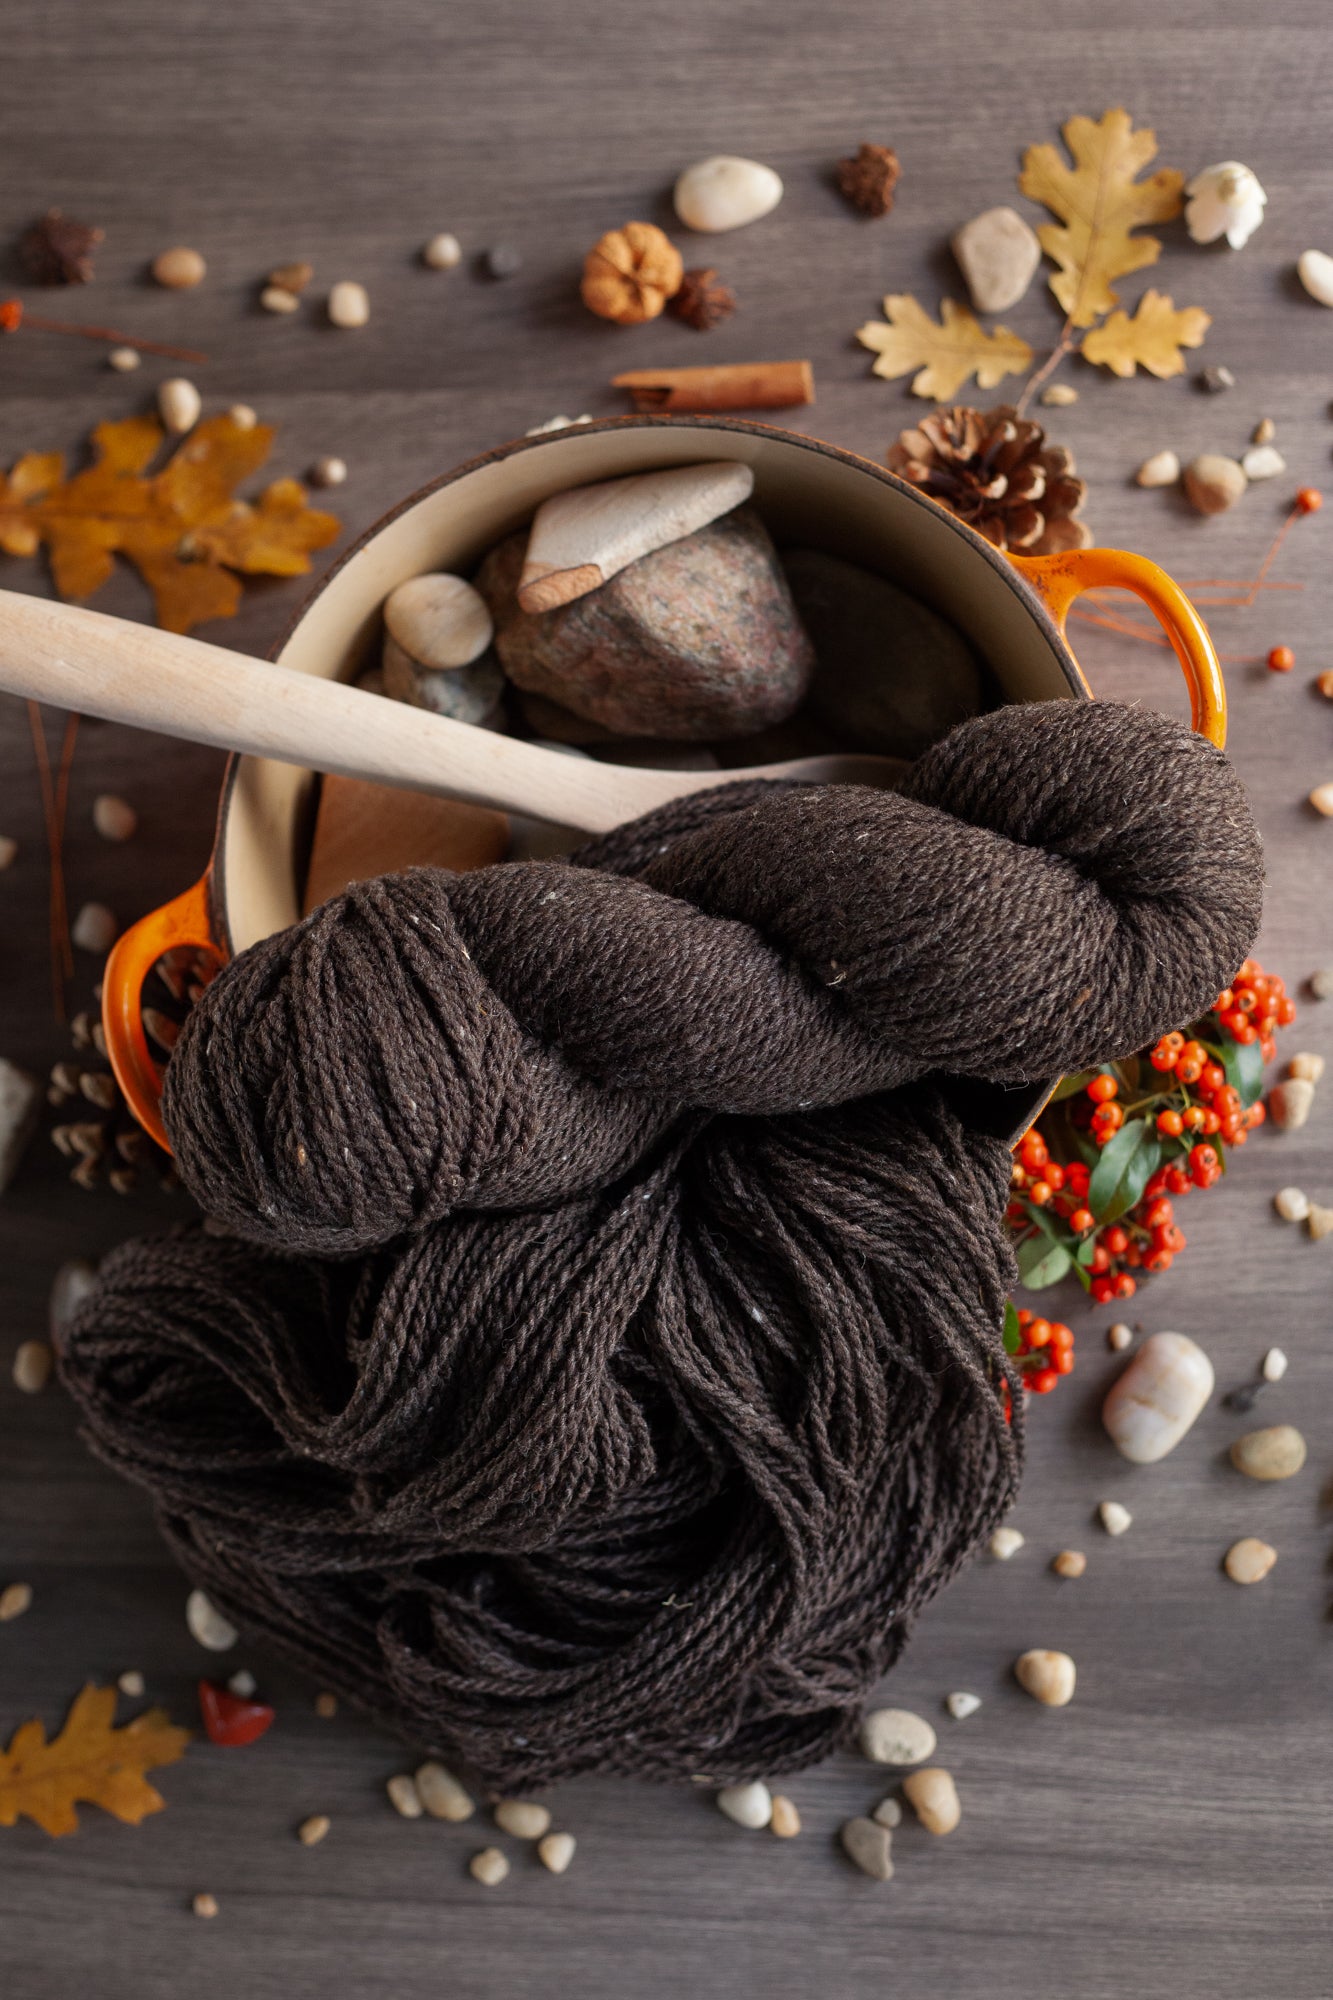 Stone Soup Worsted